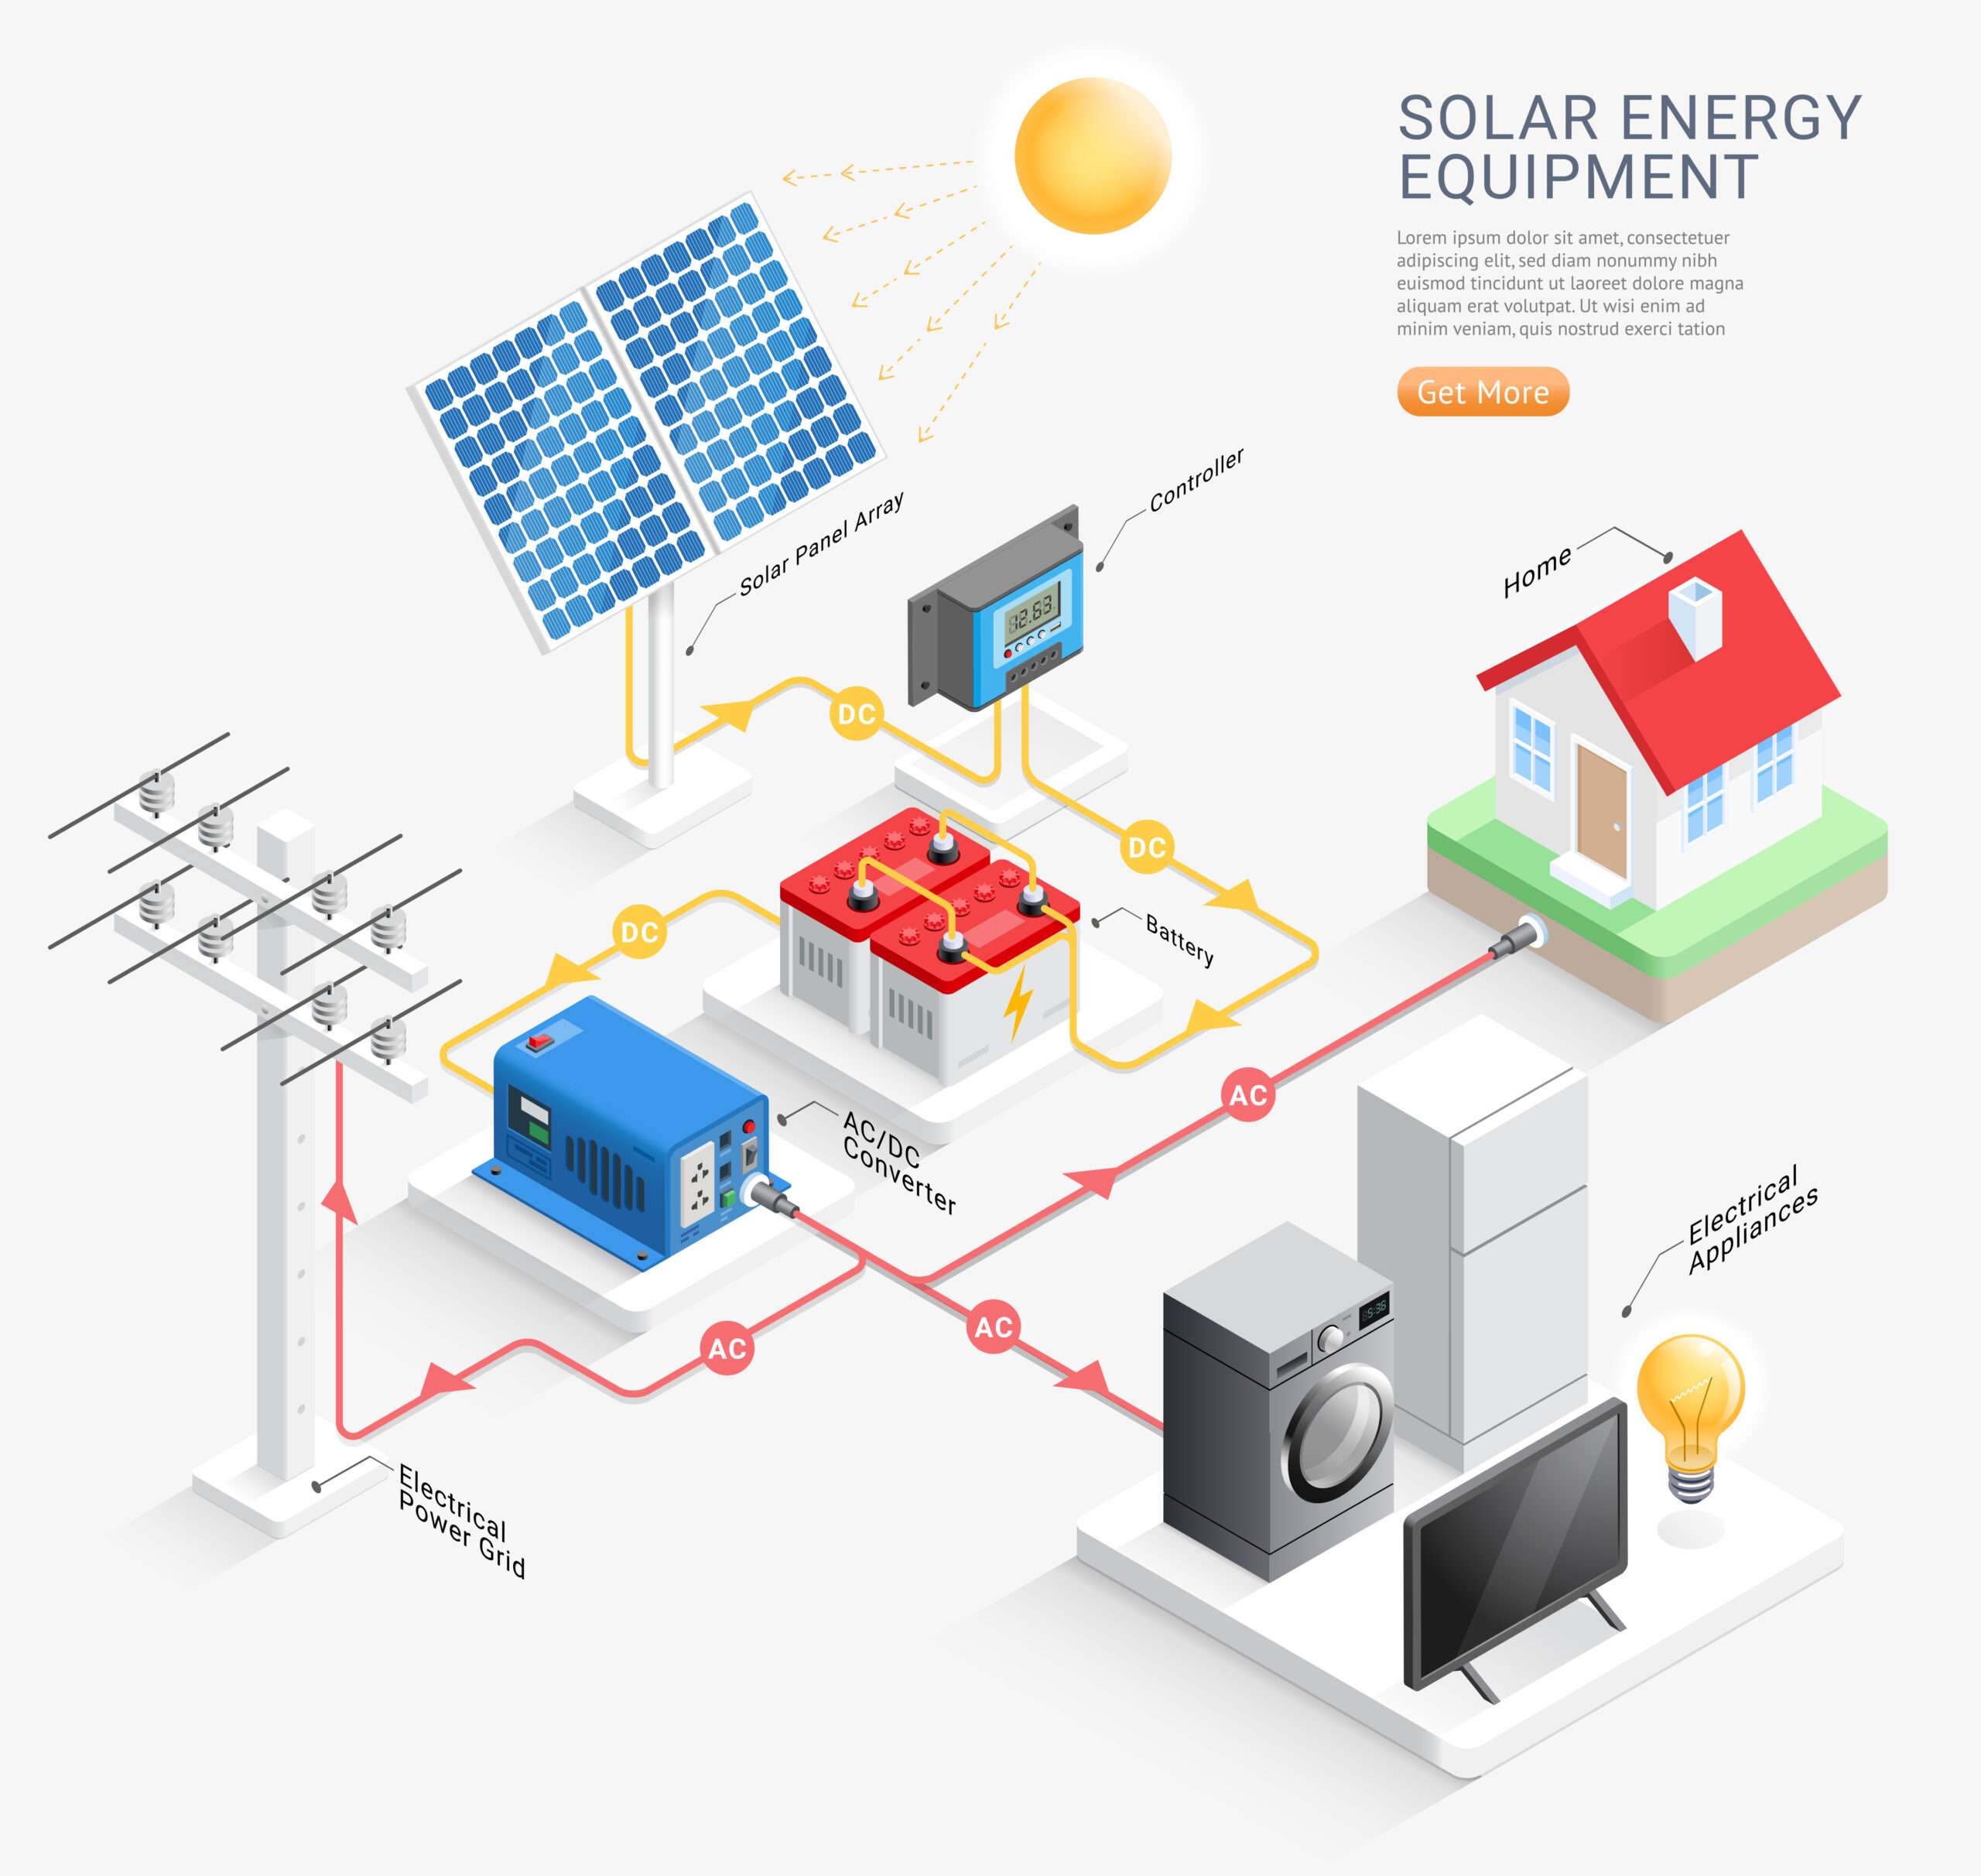 schematic-diagram-of-solar-off-grid-power-system-with-solar-panels-solar-inverter-solar-battery